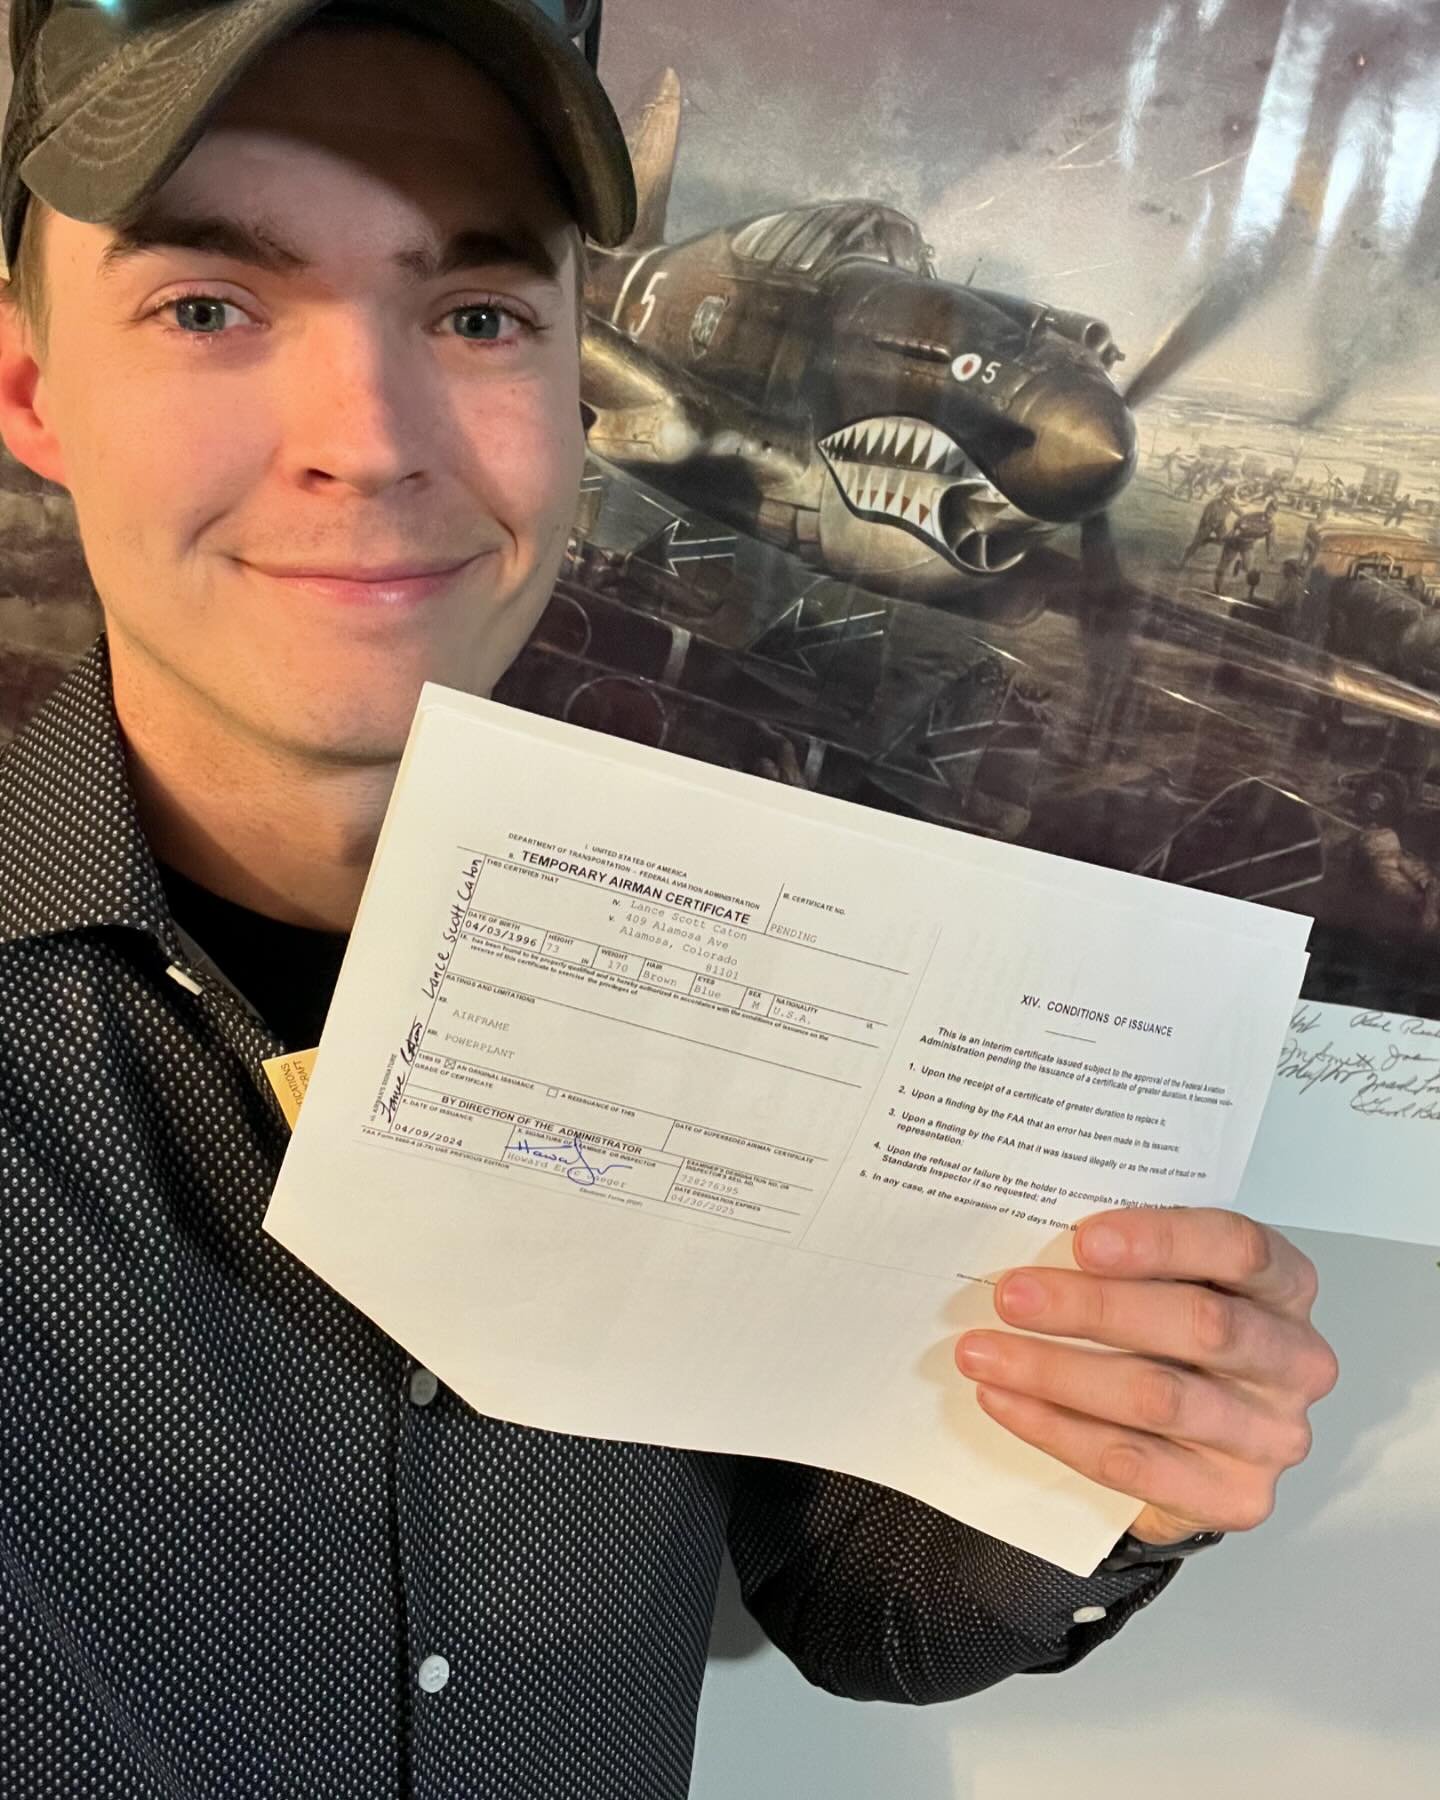 Congratulations to Lance Caton on earning his Airframe &amp; Powerplant certificate from Spartan College of Aeronautics and Technology! You are going to do great things in Wichita and we are proud of you. Say hi to Boomer for us! 🐾 -Sam &amp; Abbi